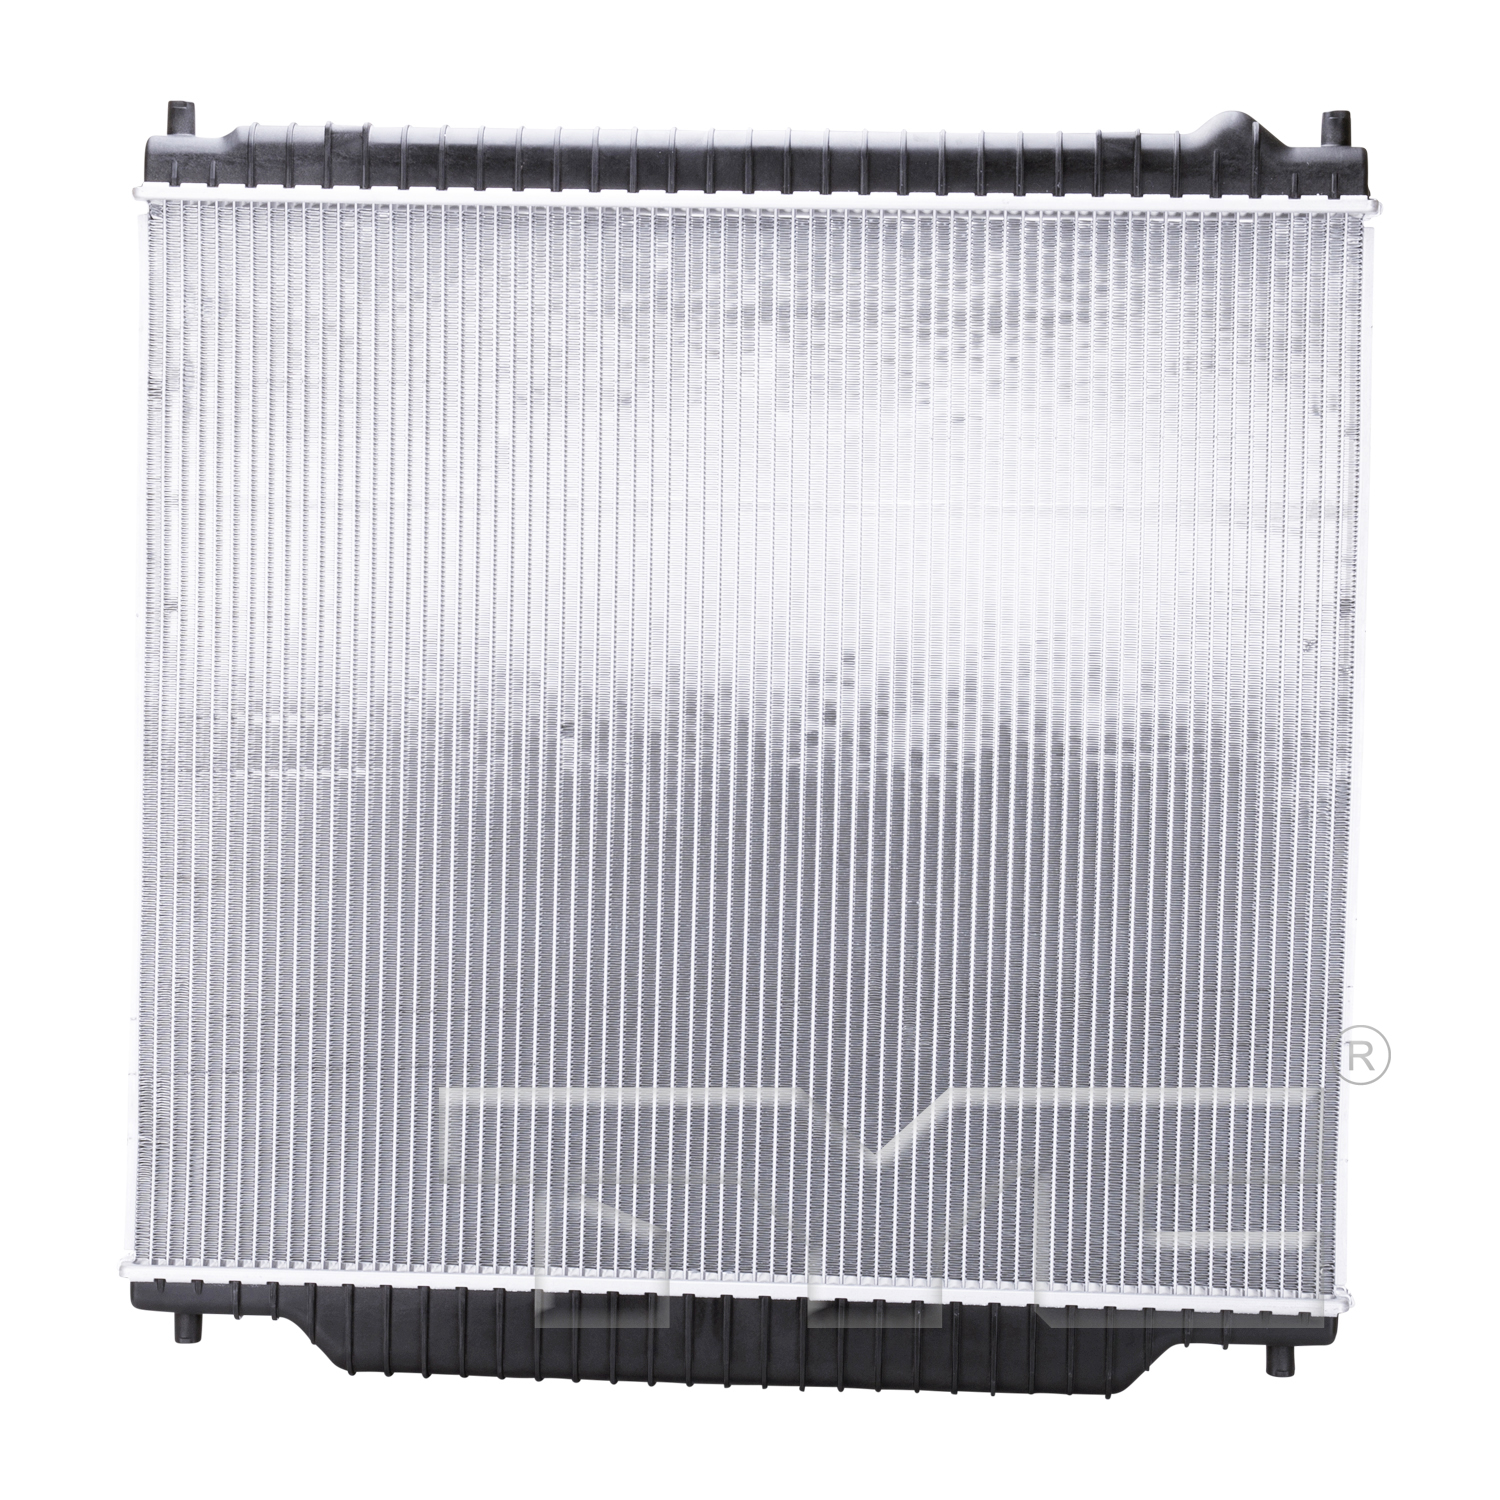 Aftermarket RADIATORS for FORD - EXCURSION, EXCURSION,00-05,Radiator assembly